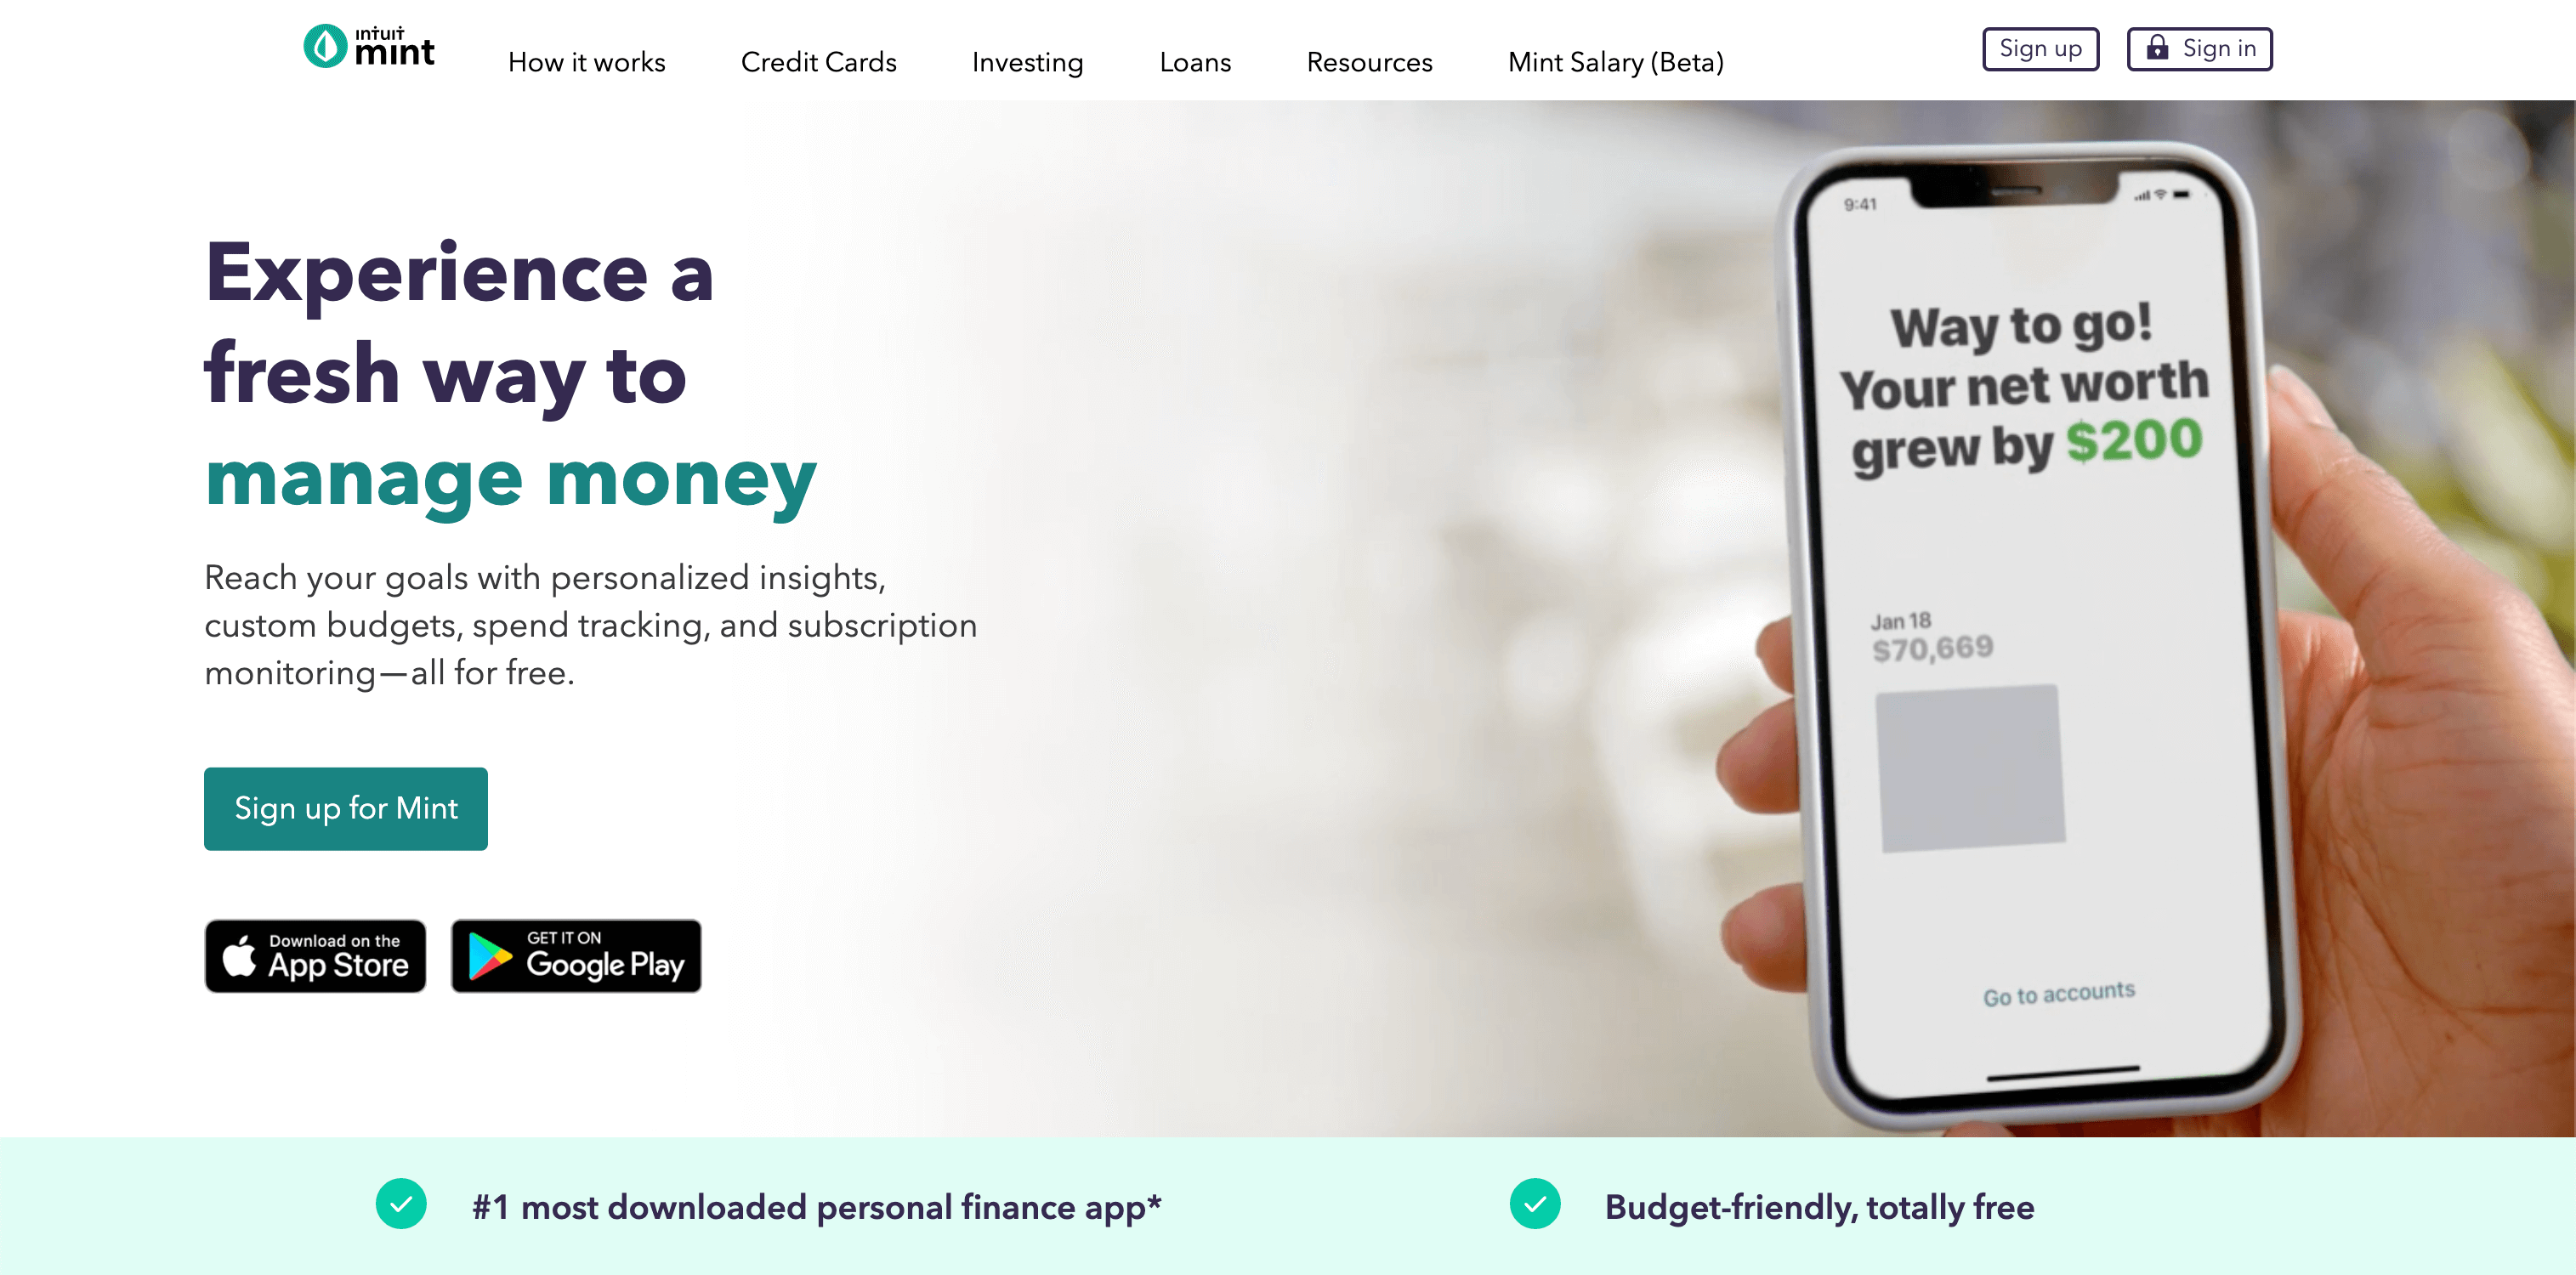 The homepage for Mint by Intuit